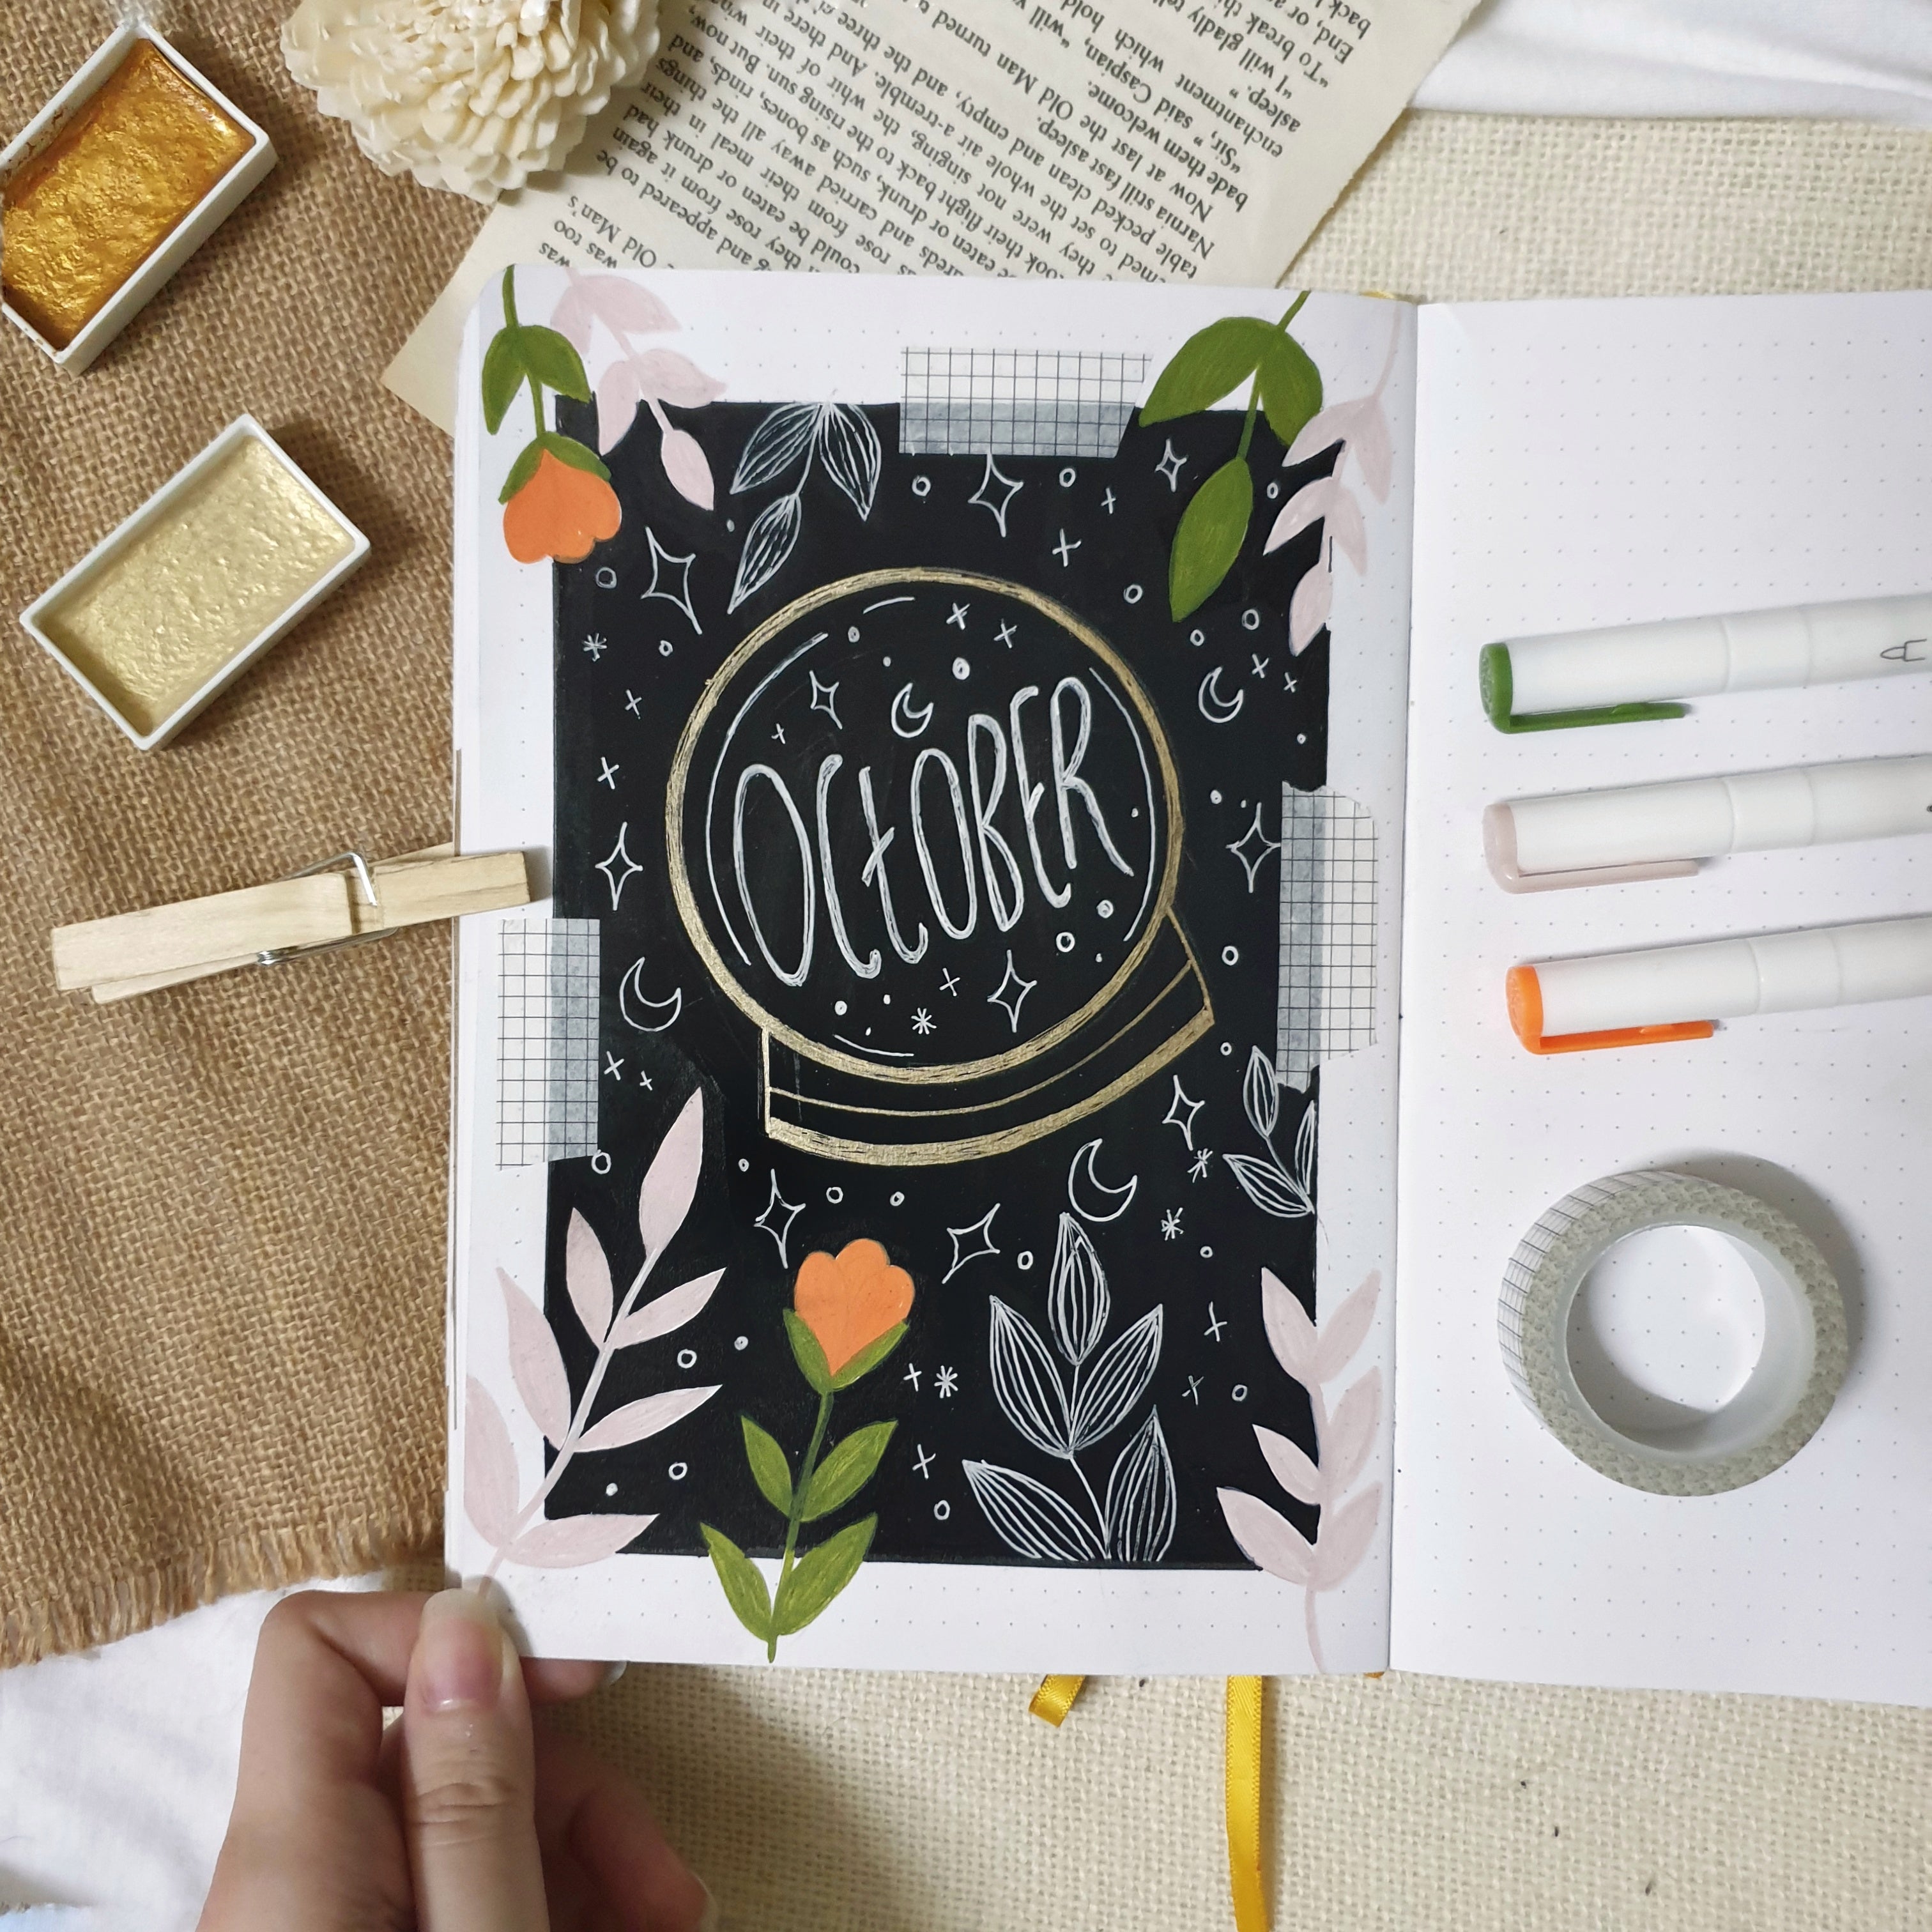 FREE Printable Lined Paper (Spring Themed!) - The Art Kit